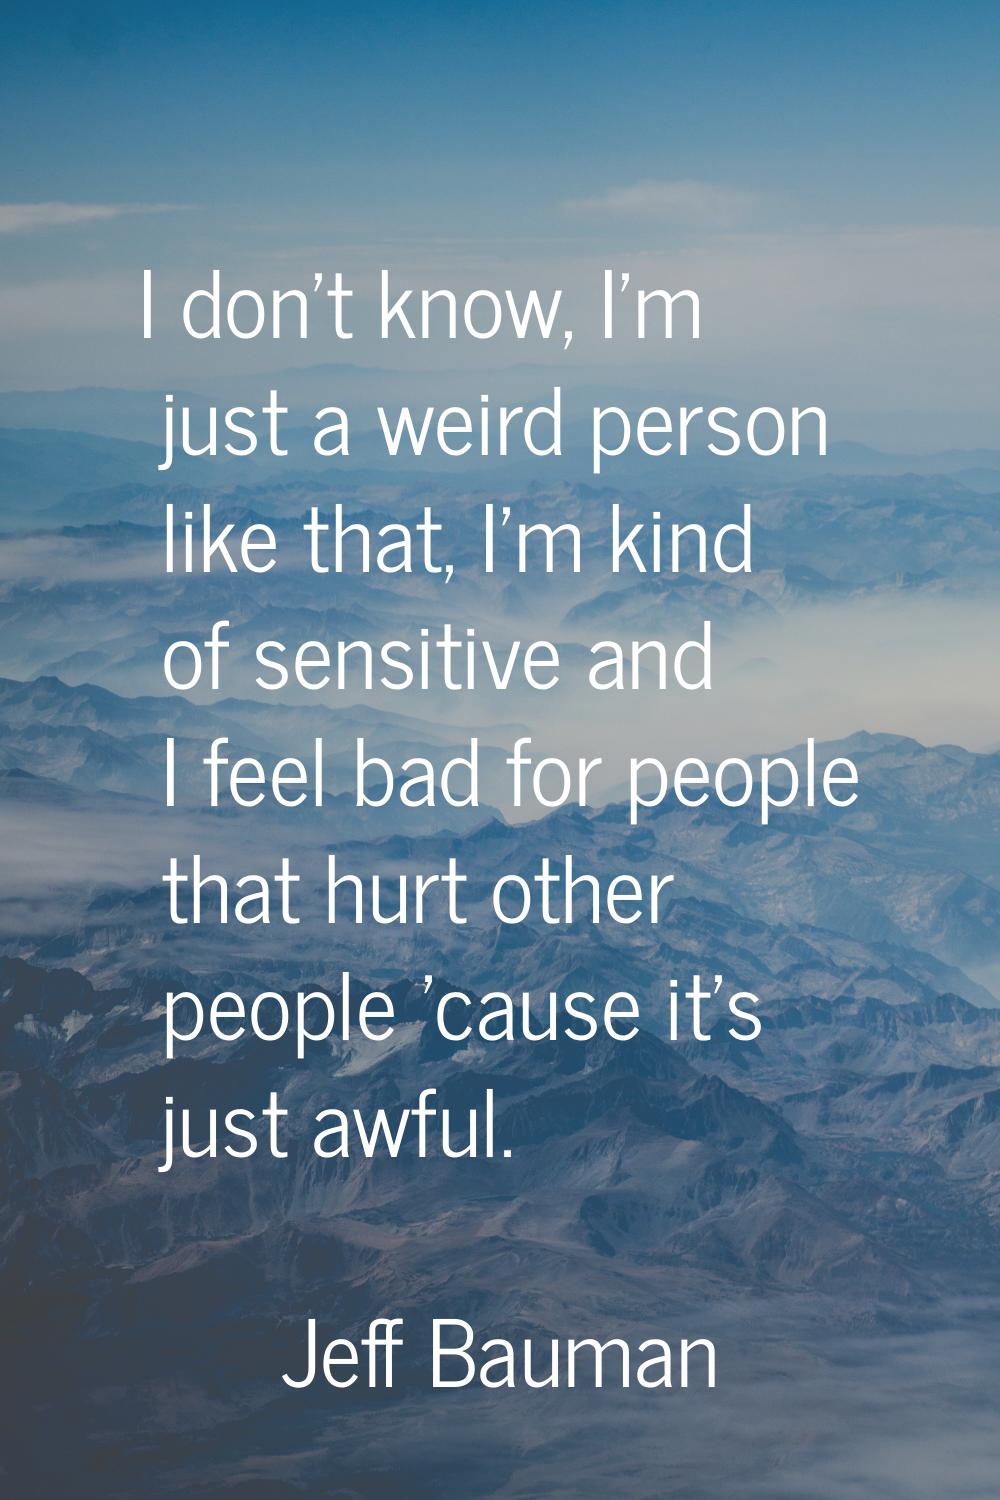 I don't know, I'm just a weird person like that, I'm kind of sensitive and I feel bad for people th